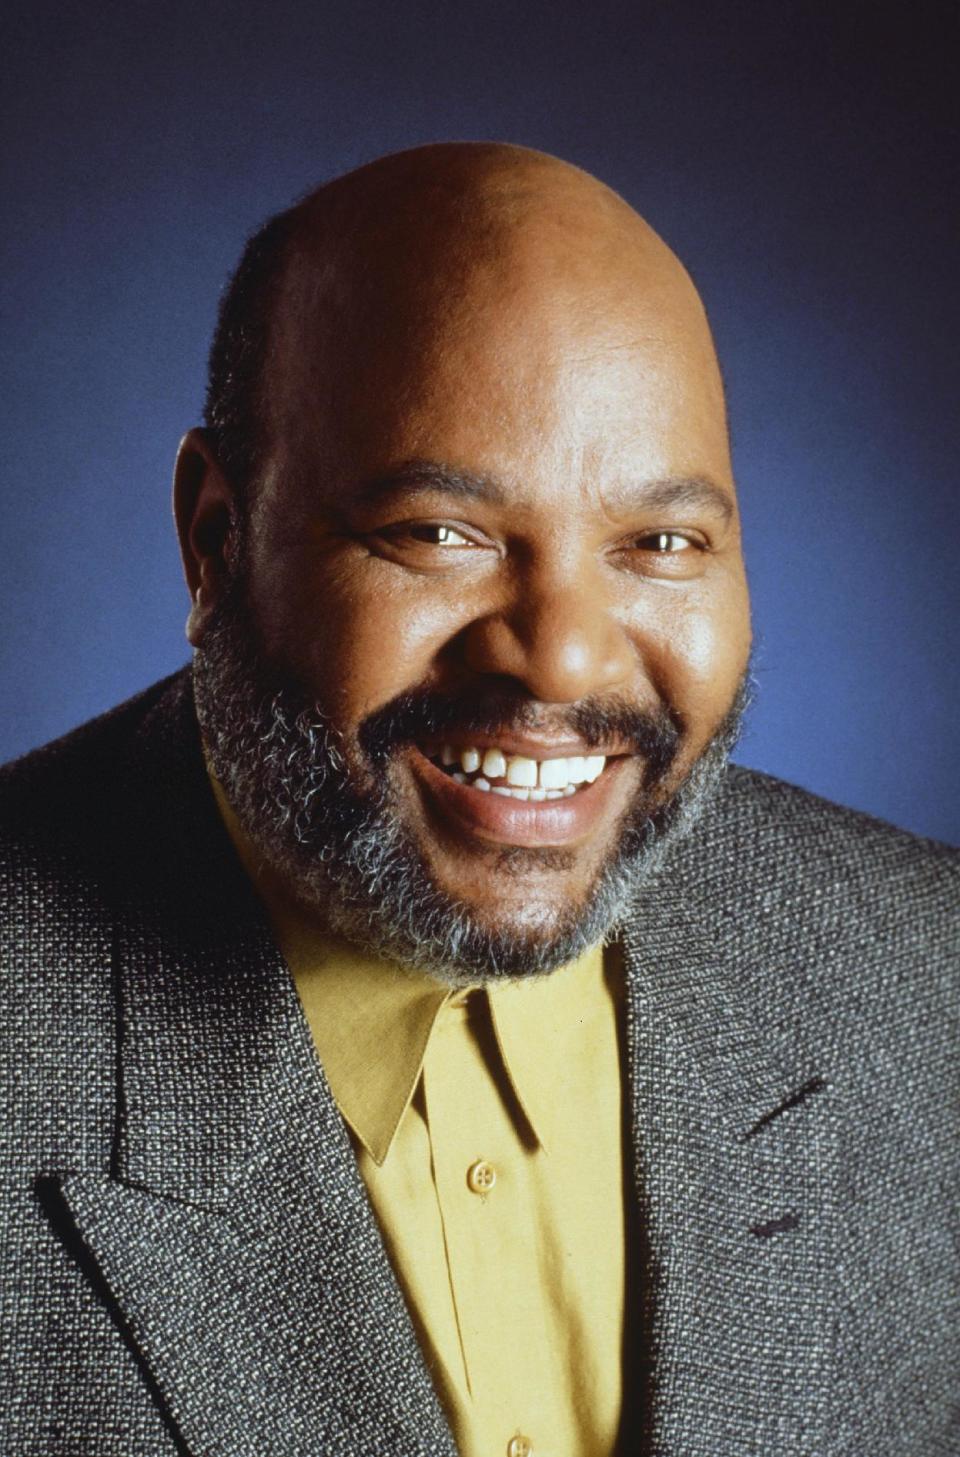 This photo provided by NBC shows James Avery as Philip Banks from season 2 of the TV series, "The Fresh Prince of Bel-Air." Avery, 65, the bulky character actor who laid down the law as the Honorable Philip Banks has died. Avery's publicist, Cynthia Snyder, told The Associated Press that Avery died Tuesday, Dec. 31, 2013. (AP Photo/NBC, Paul Drinkwater)